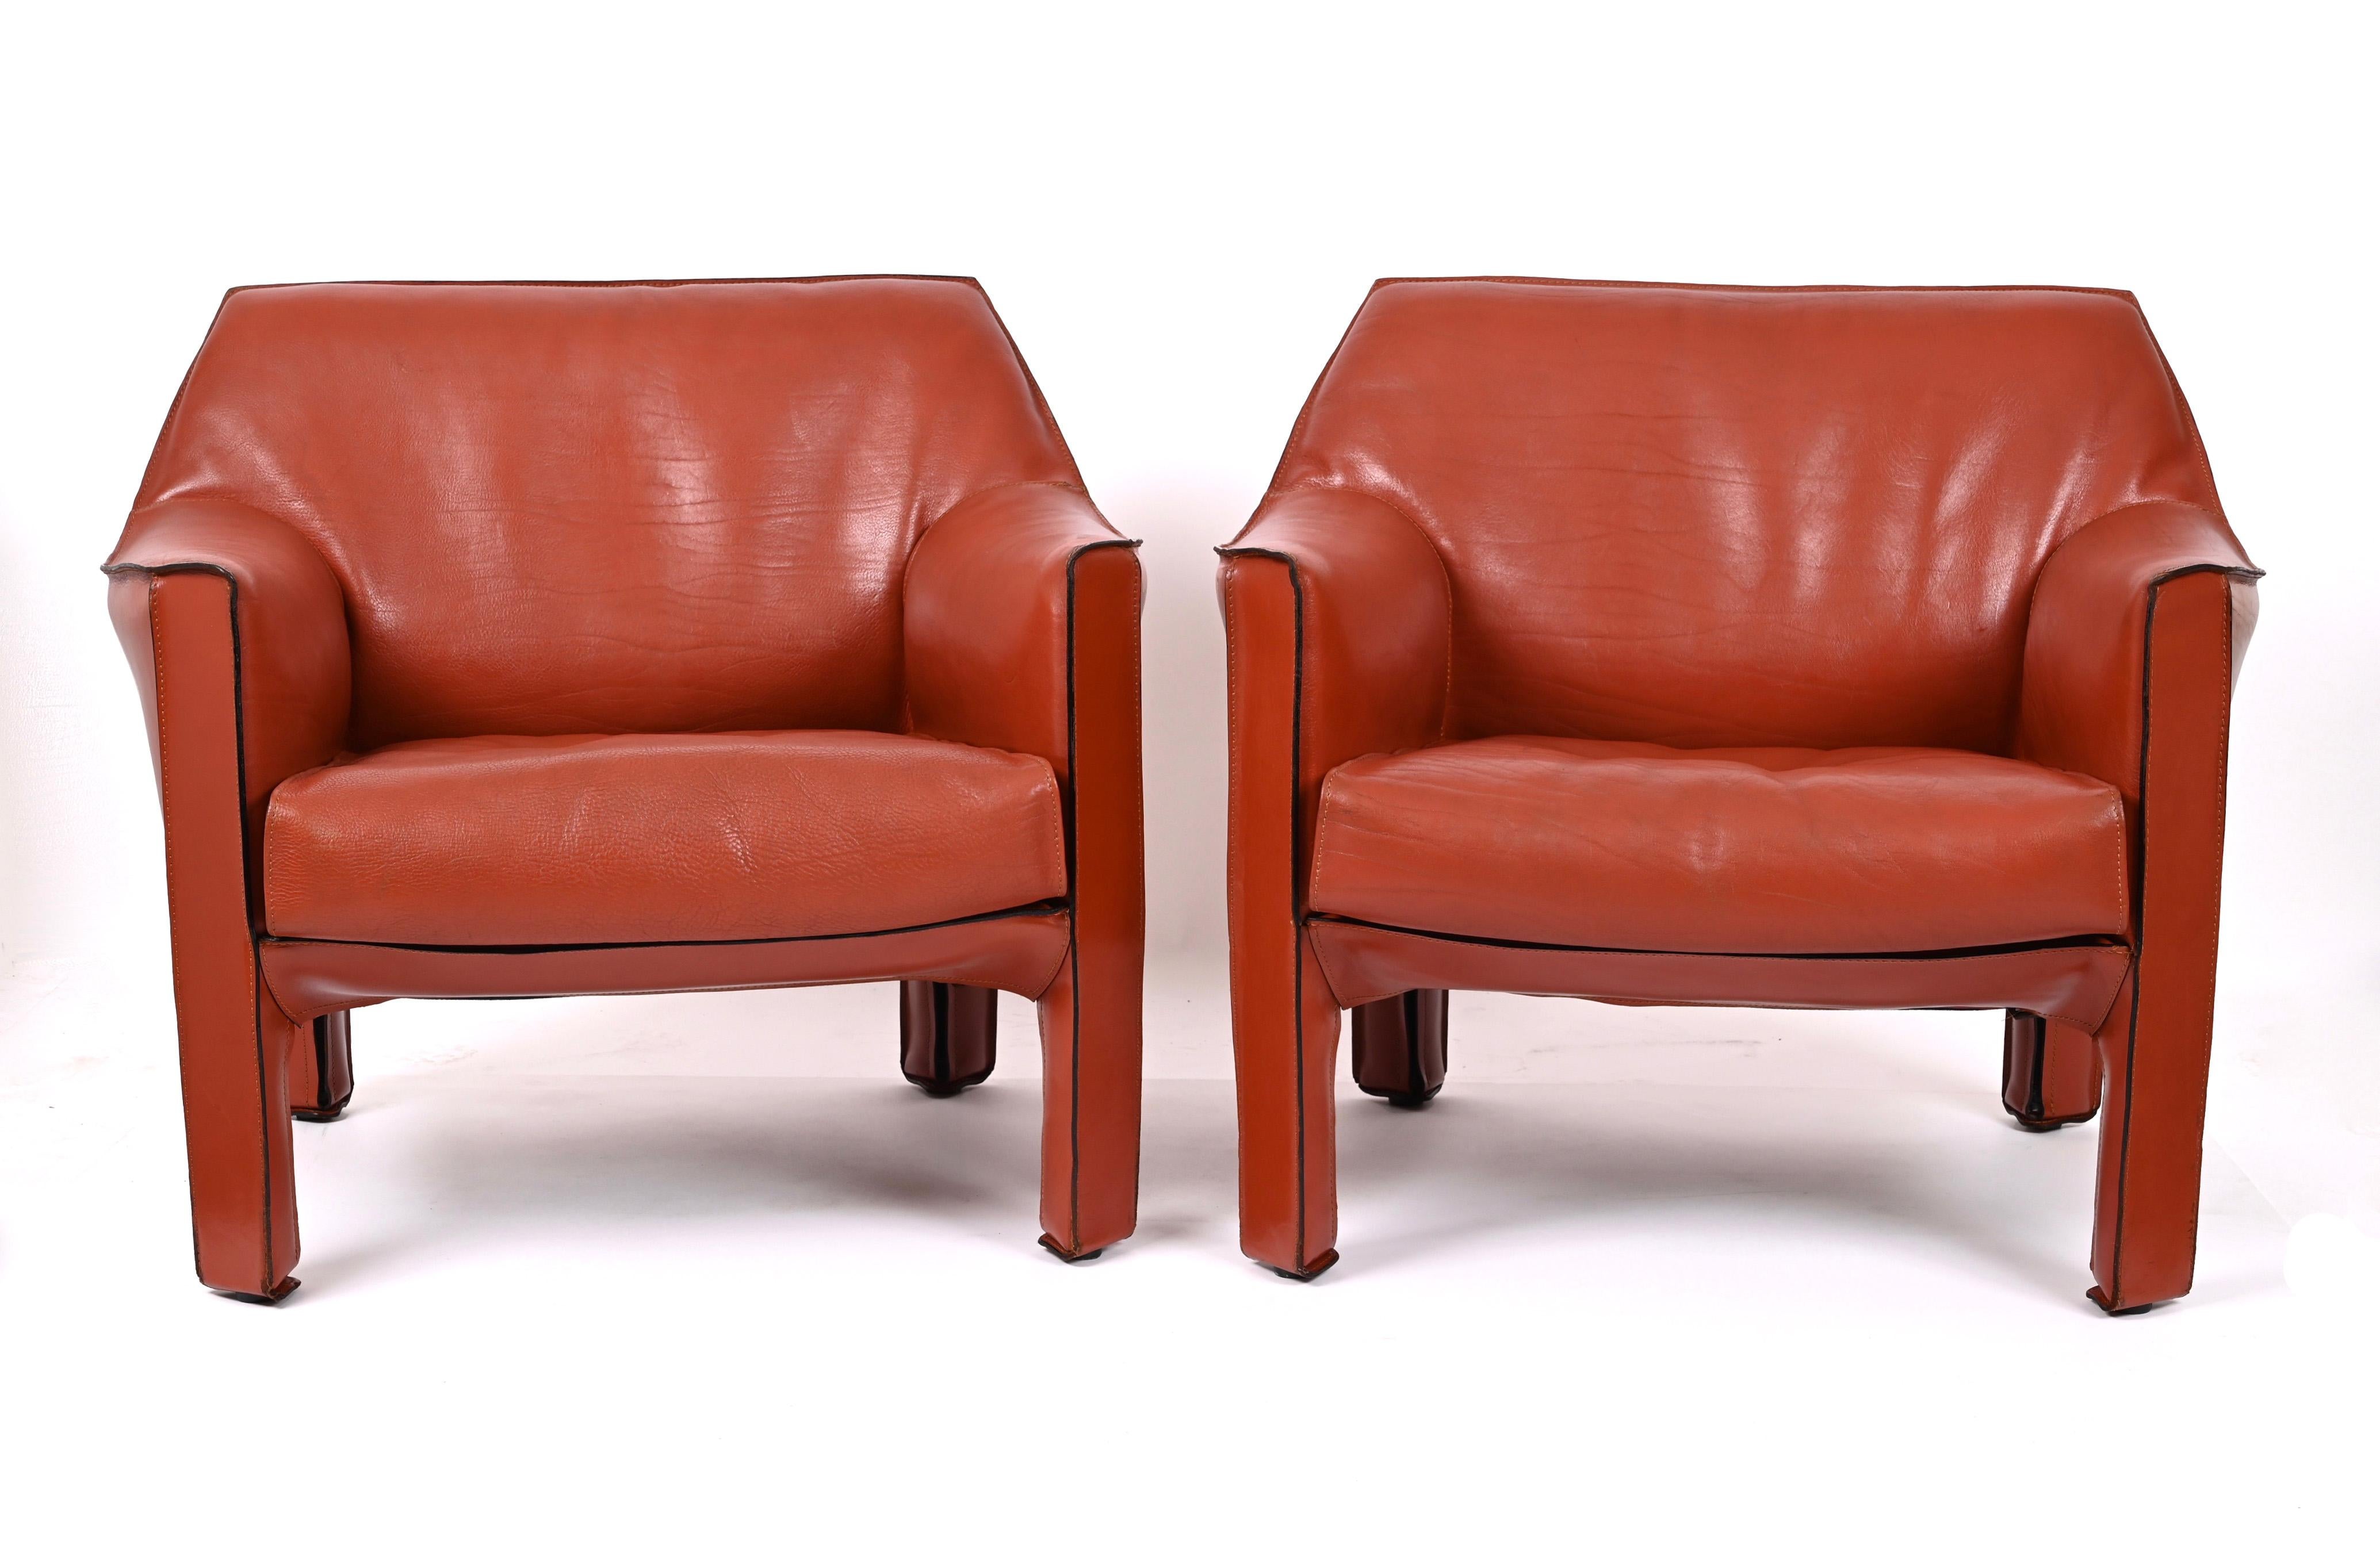 A beautiful set of two rare club ArmChairs by Mario Bellini, model 415 